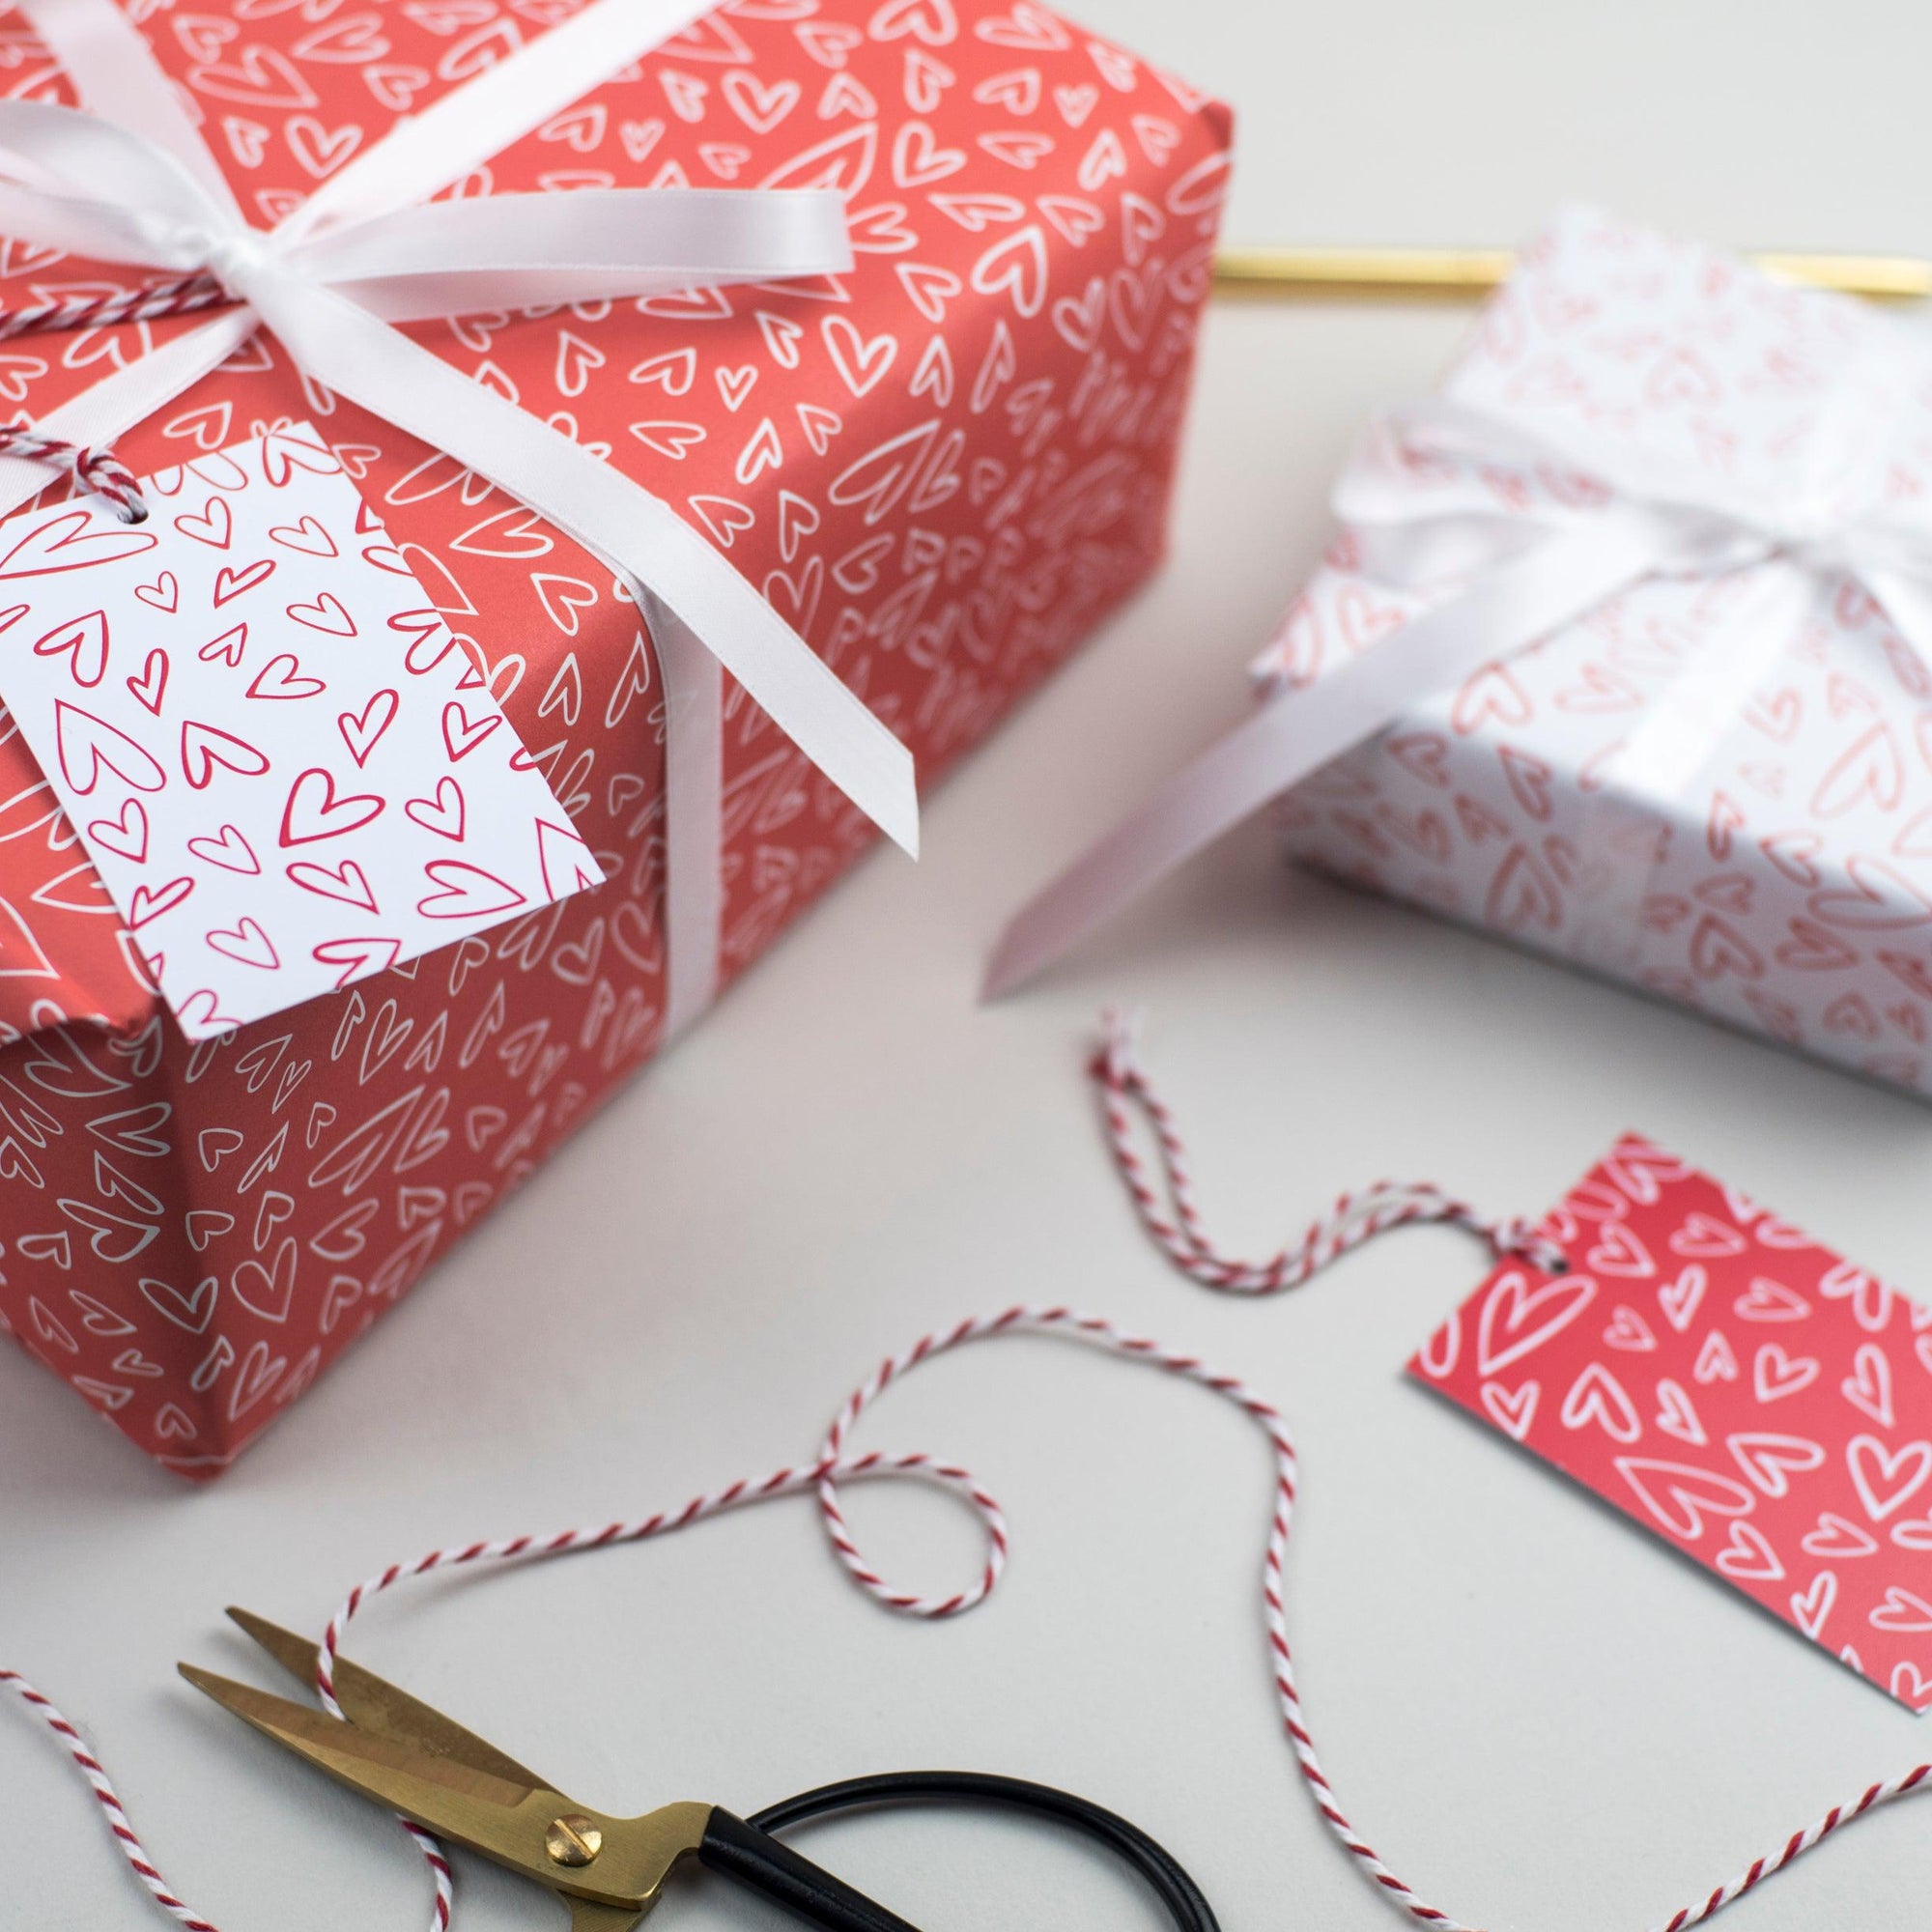 Handdrawn Heart Valentine's Wrapping Paper Set